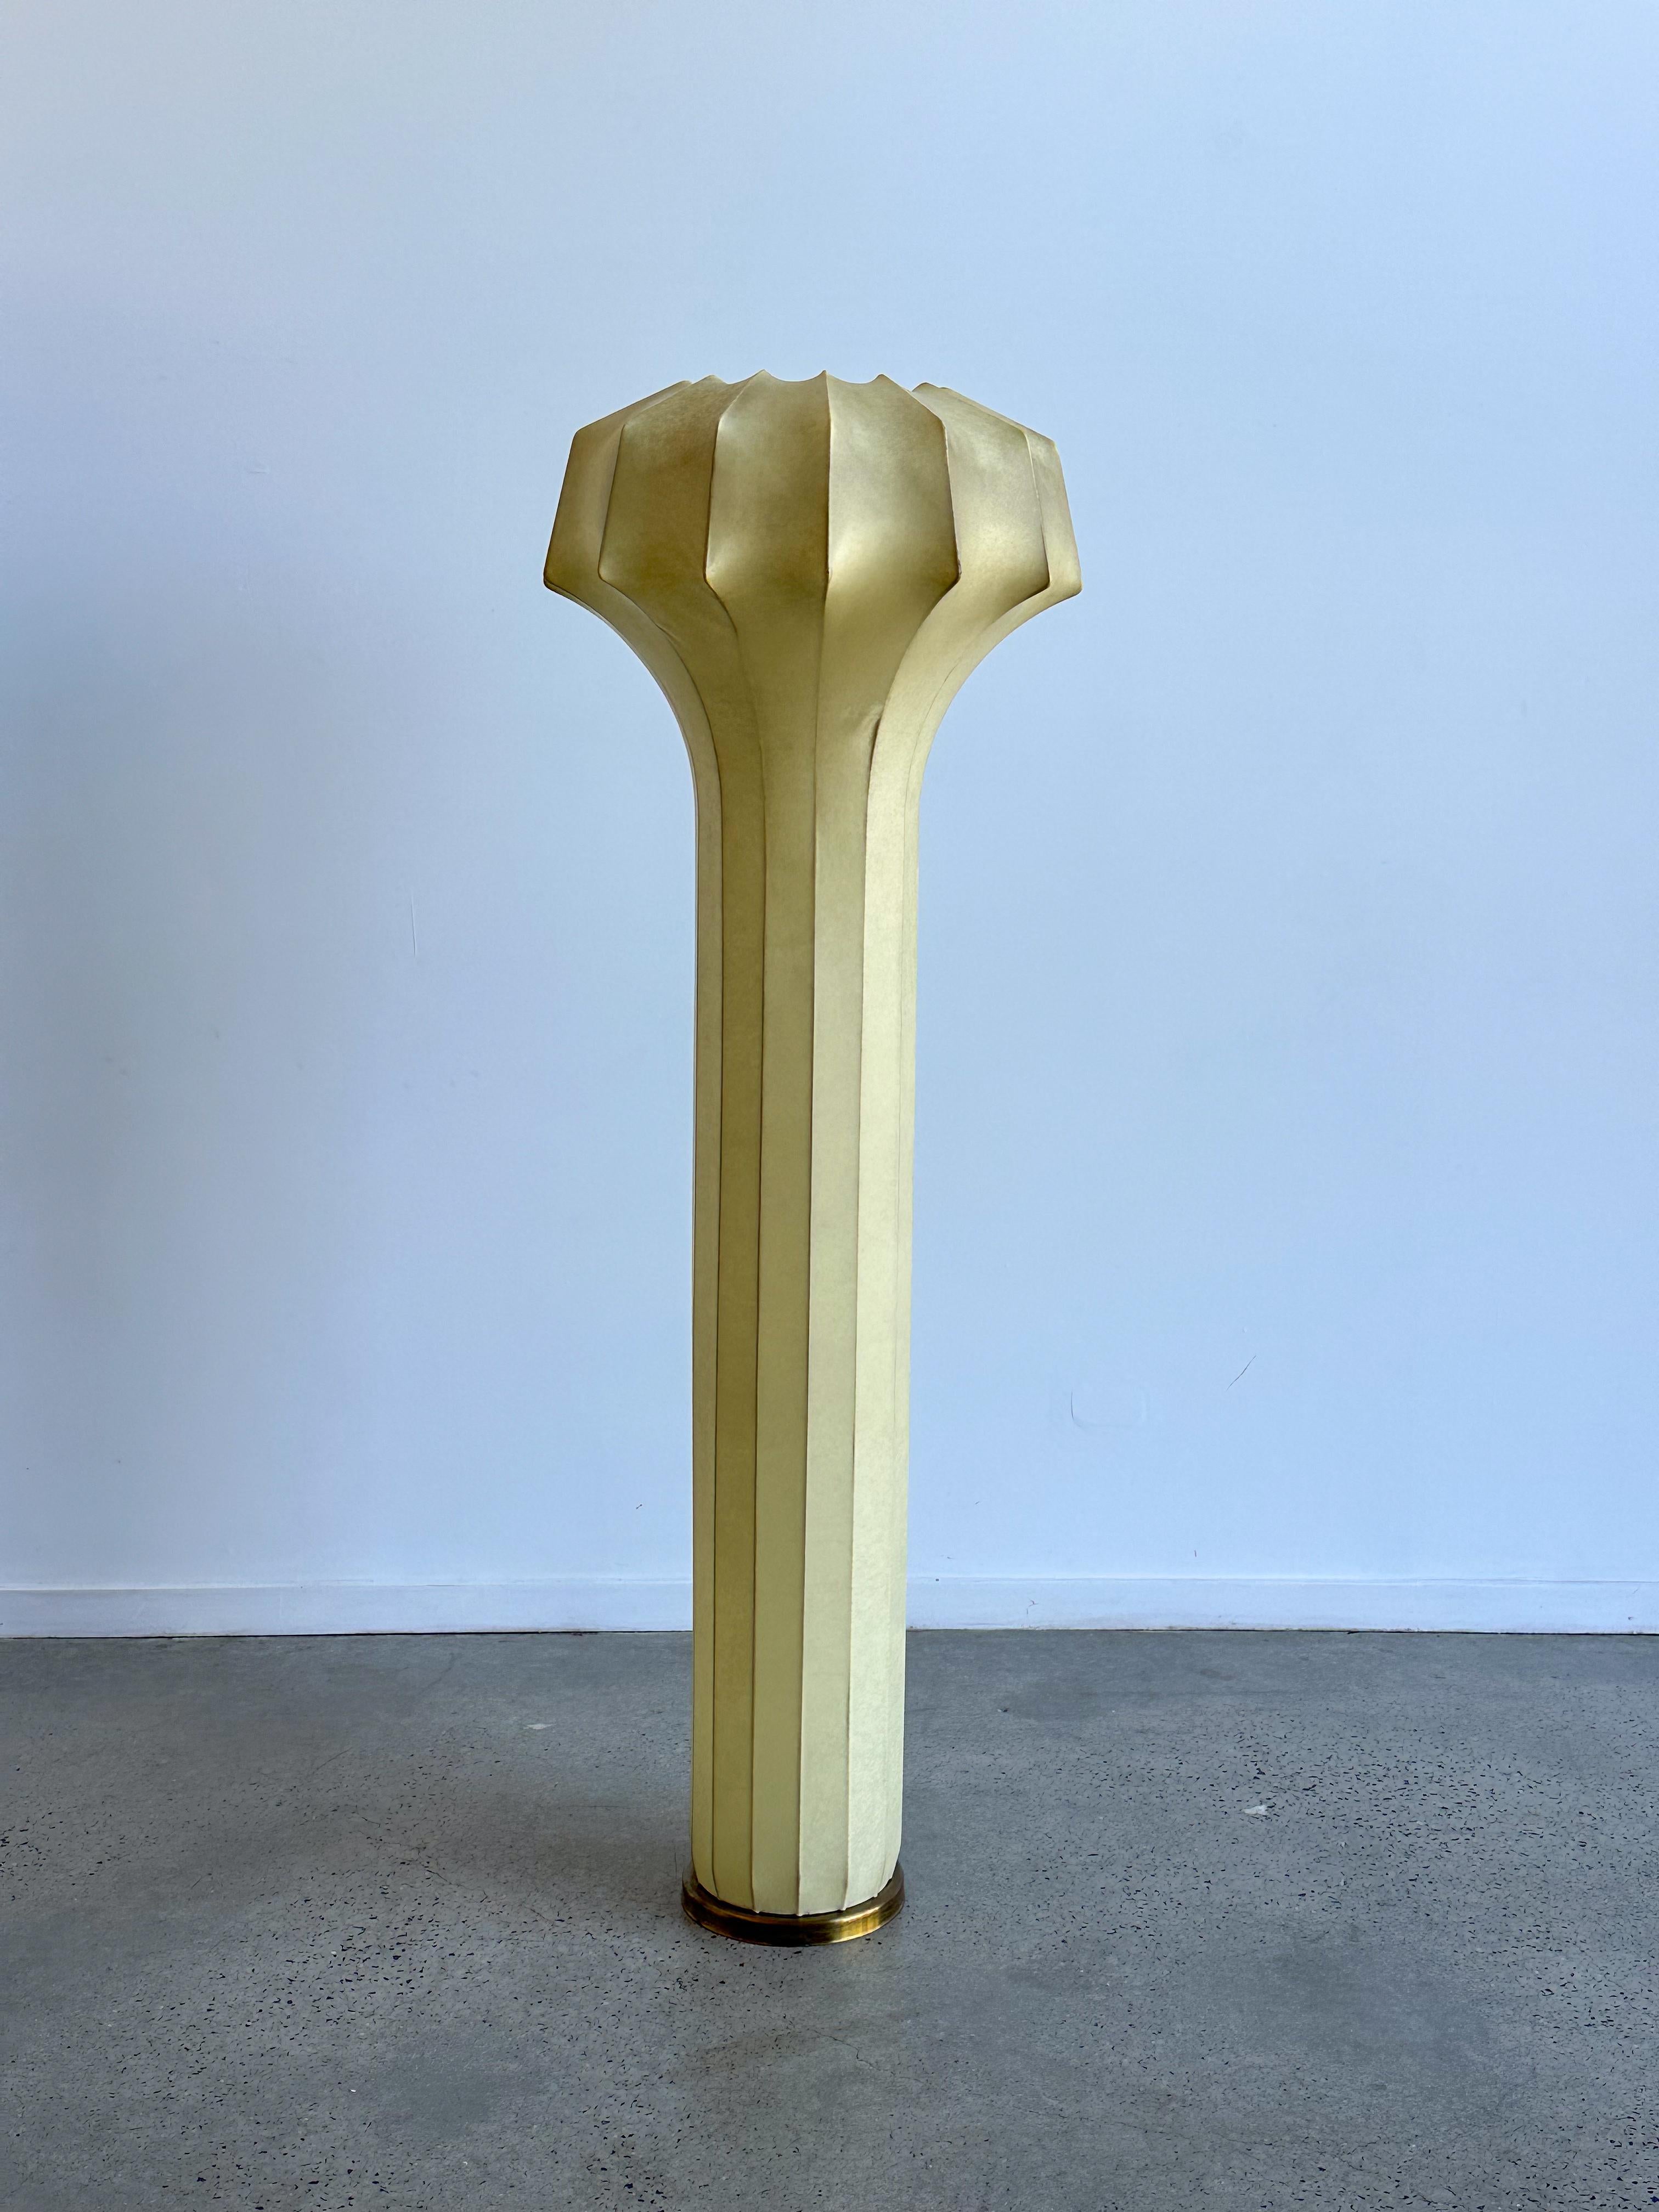 This extremely rare floor lamp features an internal steel structure with three light sockets and is covered with sprayed resin cover, which provides beautiful soft light effects. This piece is a stunning example of mid-century modern lighting